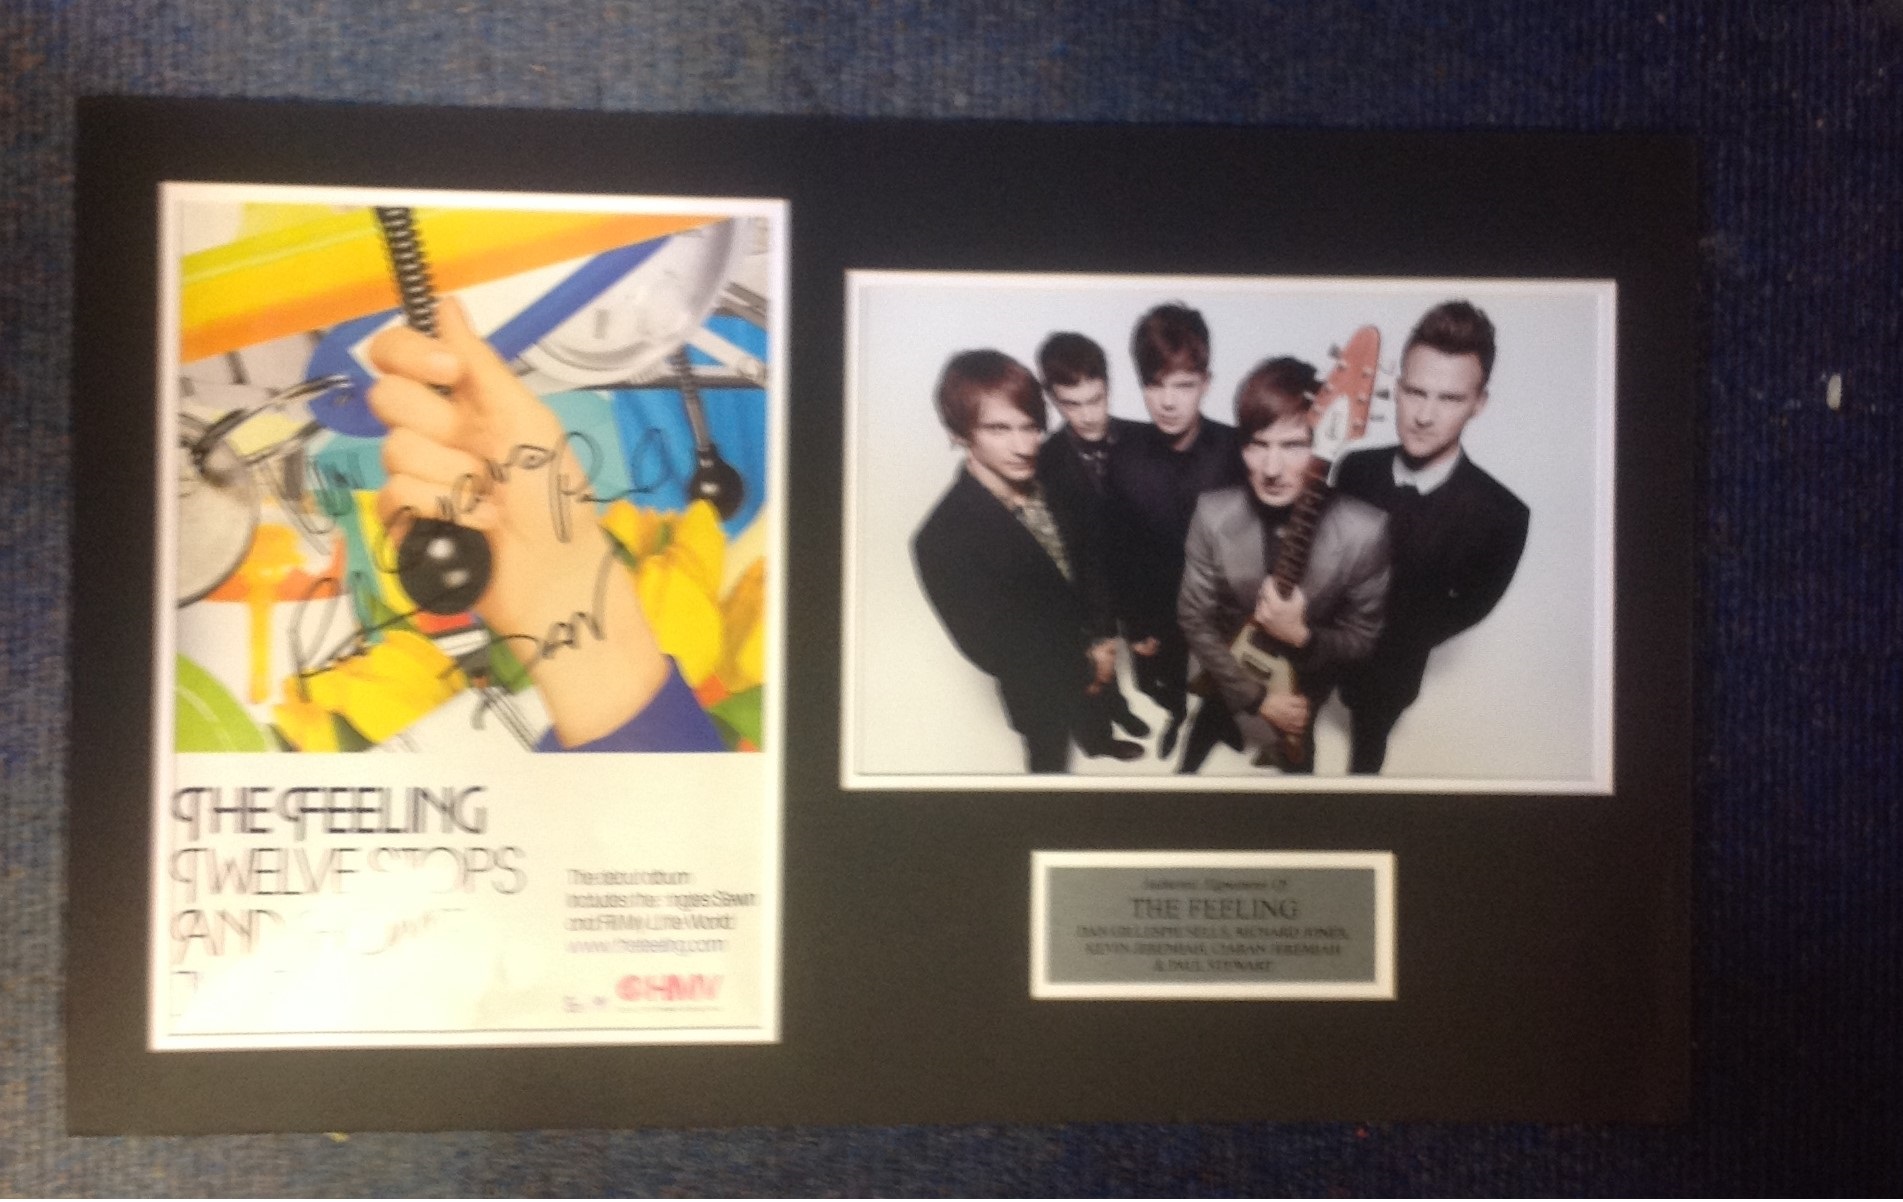 The Feeling signed album flyer mounted alongside colour photo. Approx overall size 22x14. Good